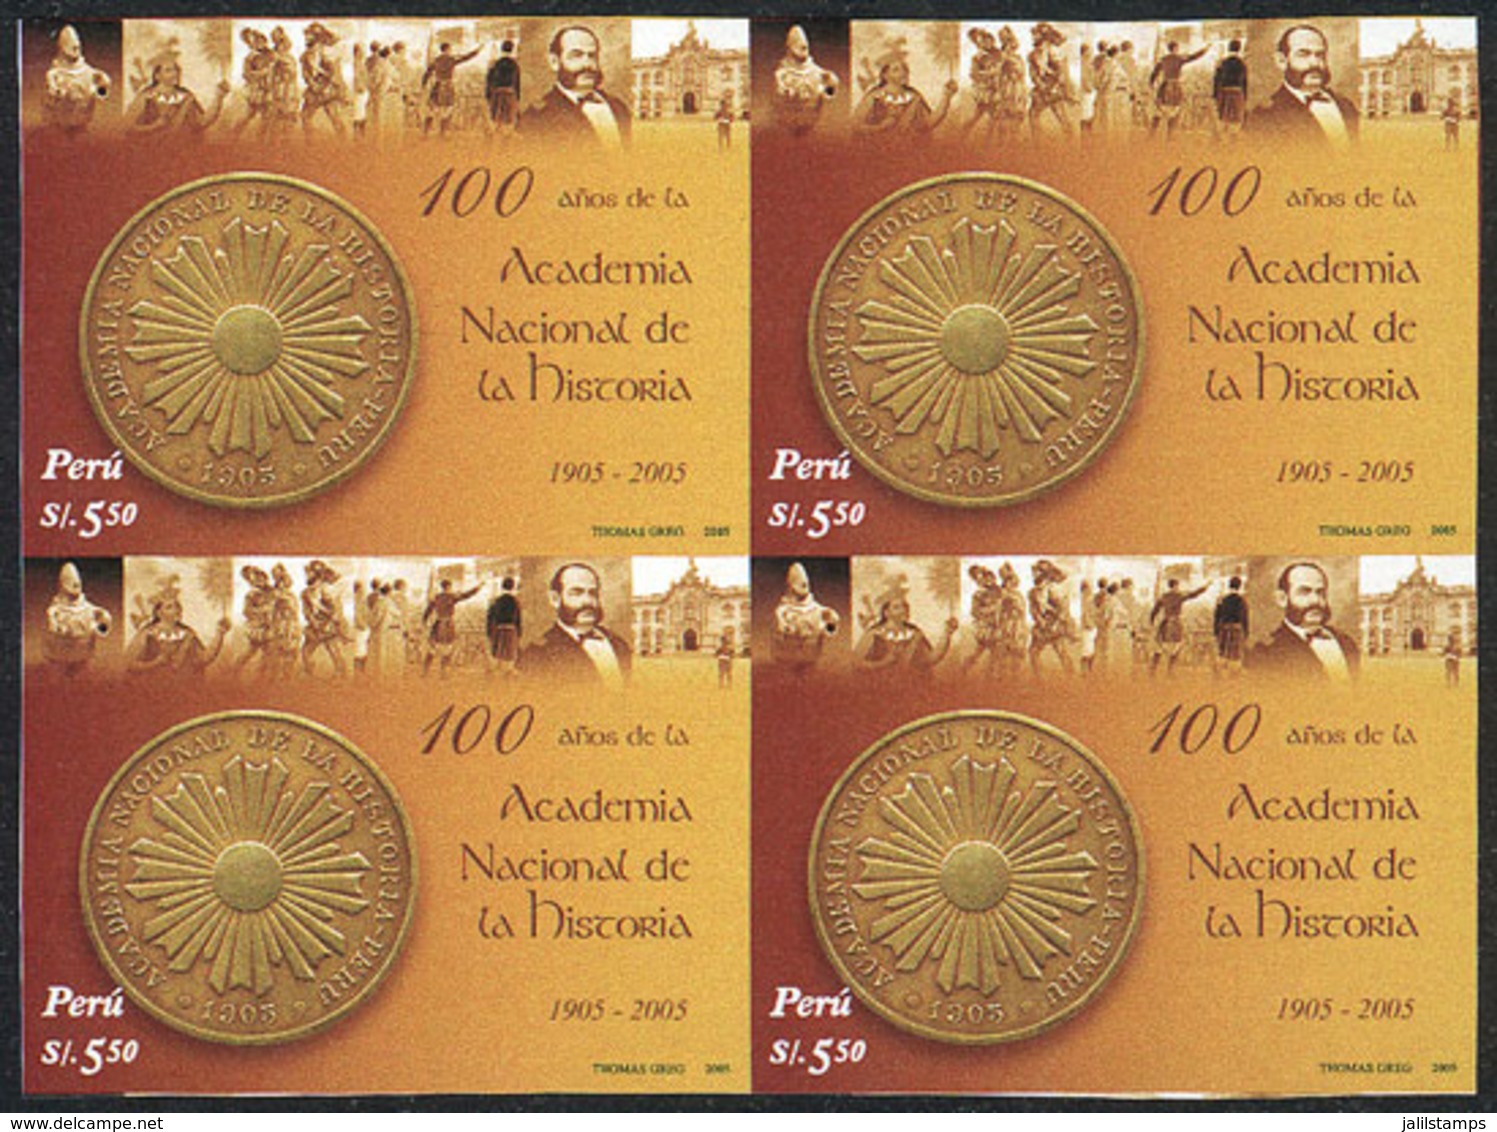 PERU: Sc.1492, 2006 National Academy Of History, IMPERFORATE BLOCK OF 4, Excellent Quality, Rare! - Peru